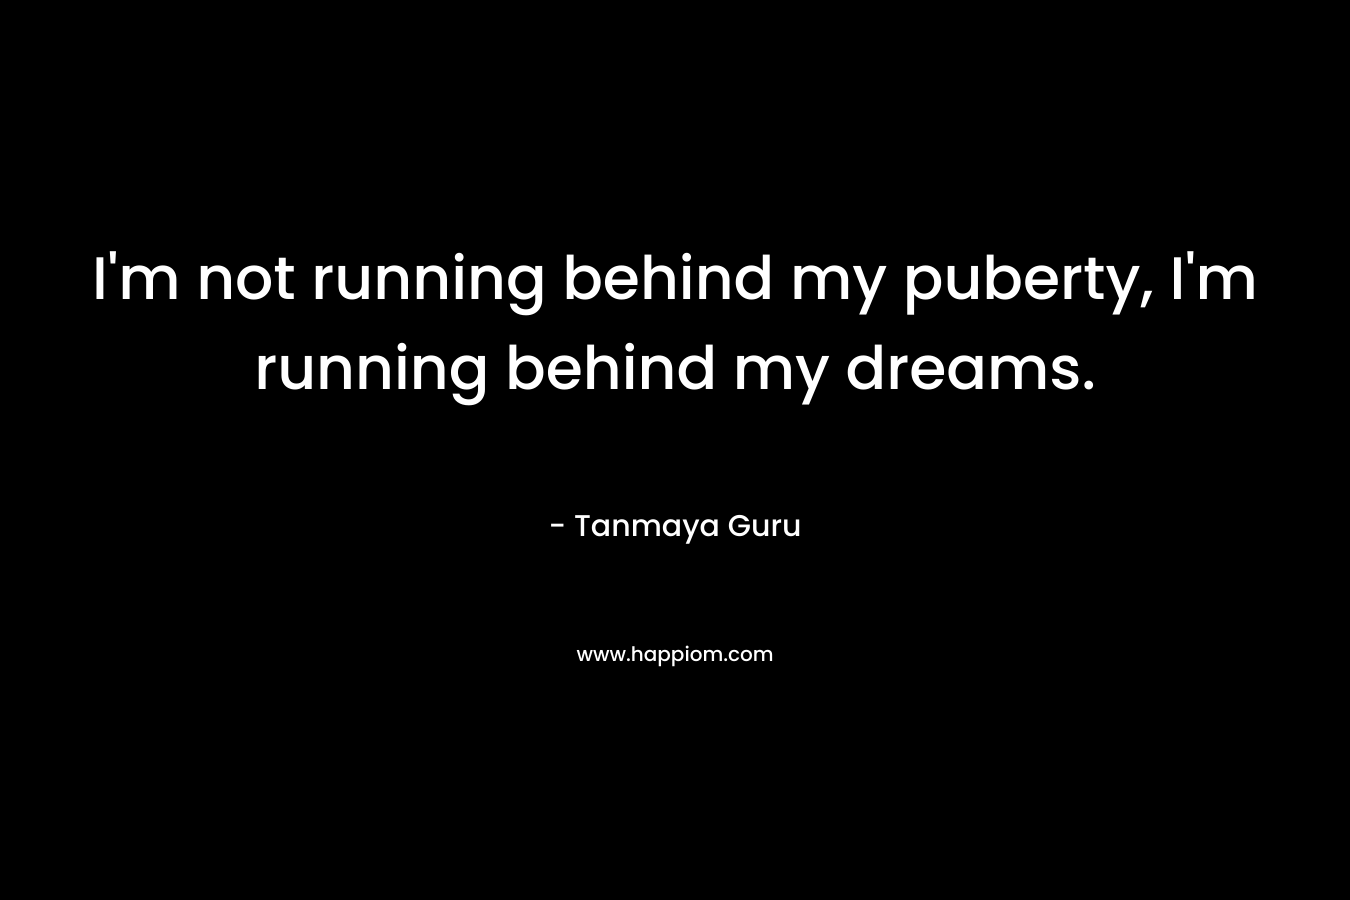 I'm not running behind my puberty, I'm running behind my dreams.